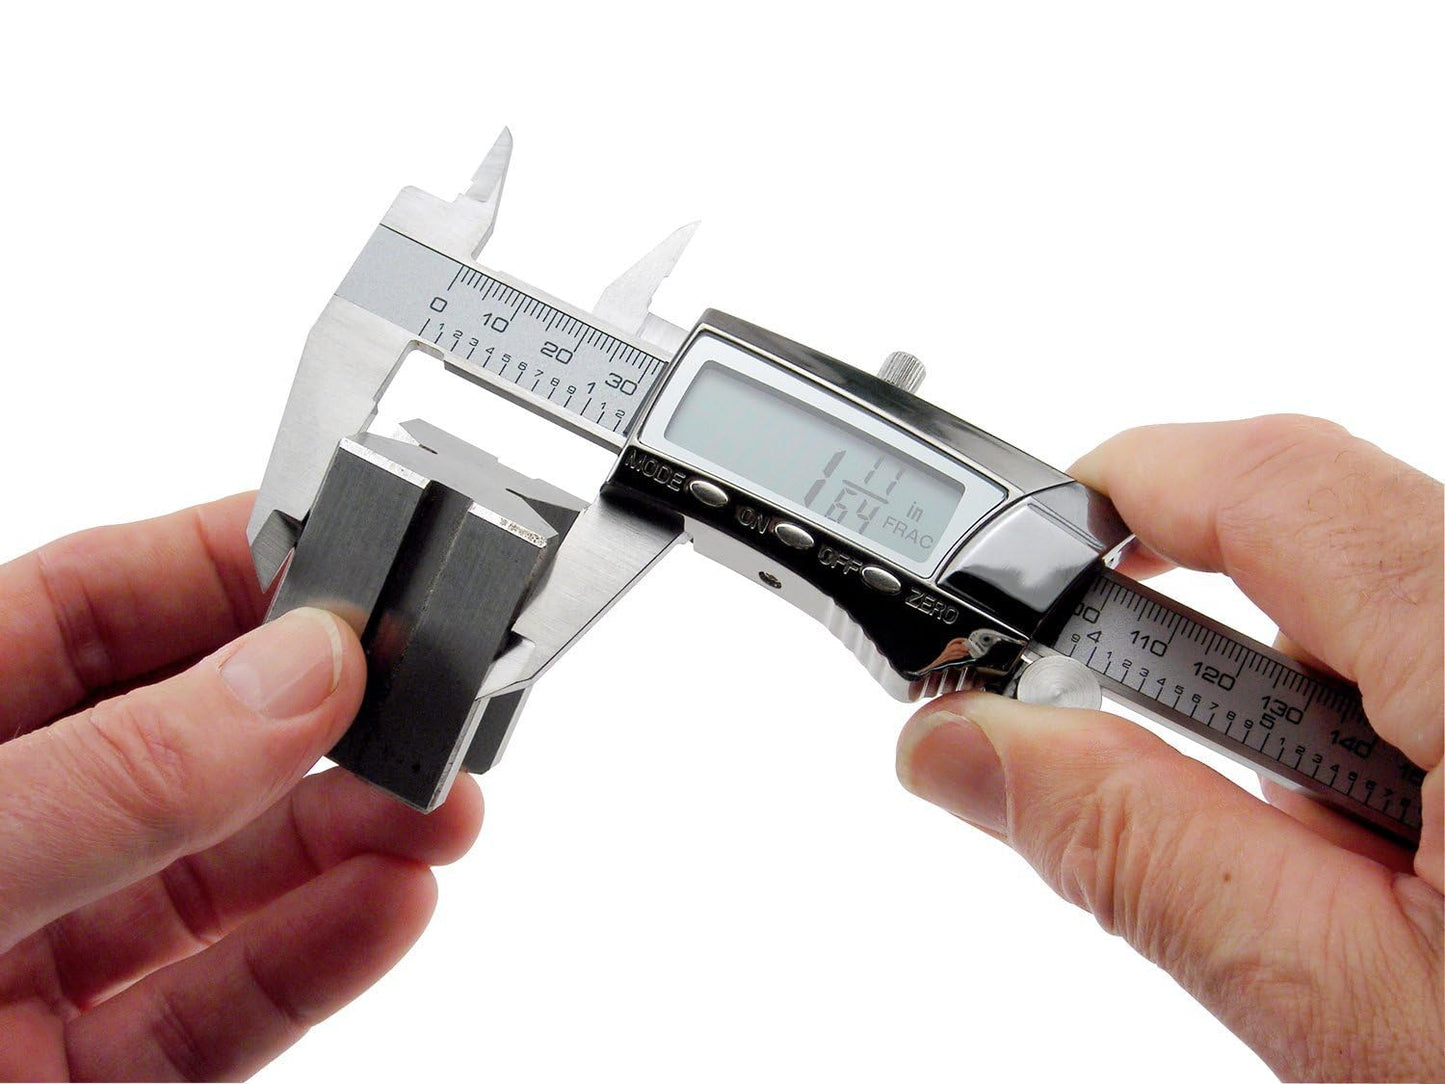 General Tools 147 Digital Fractional Caliper With Extra-Large Lcd Screen